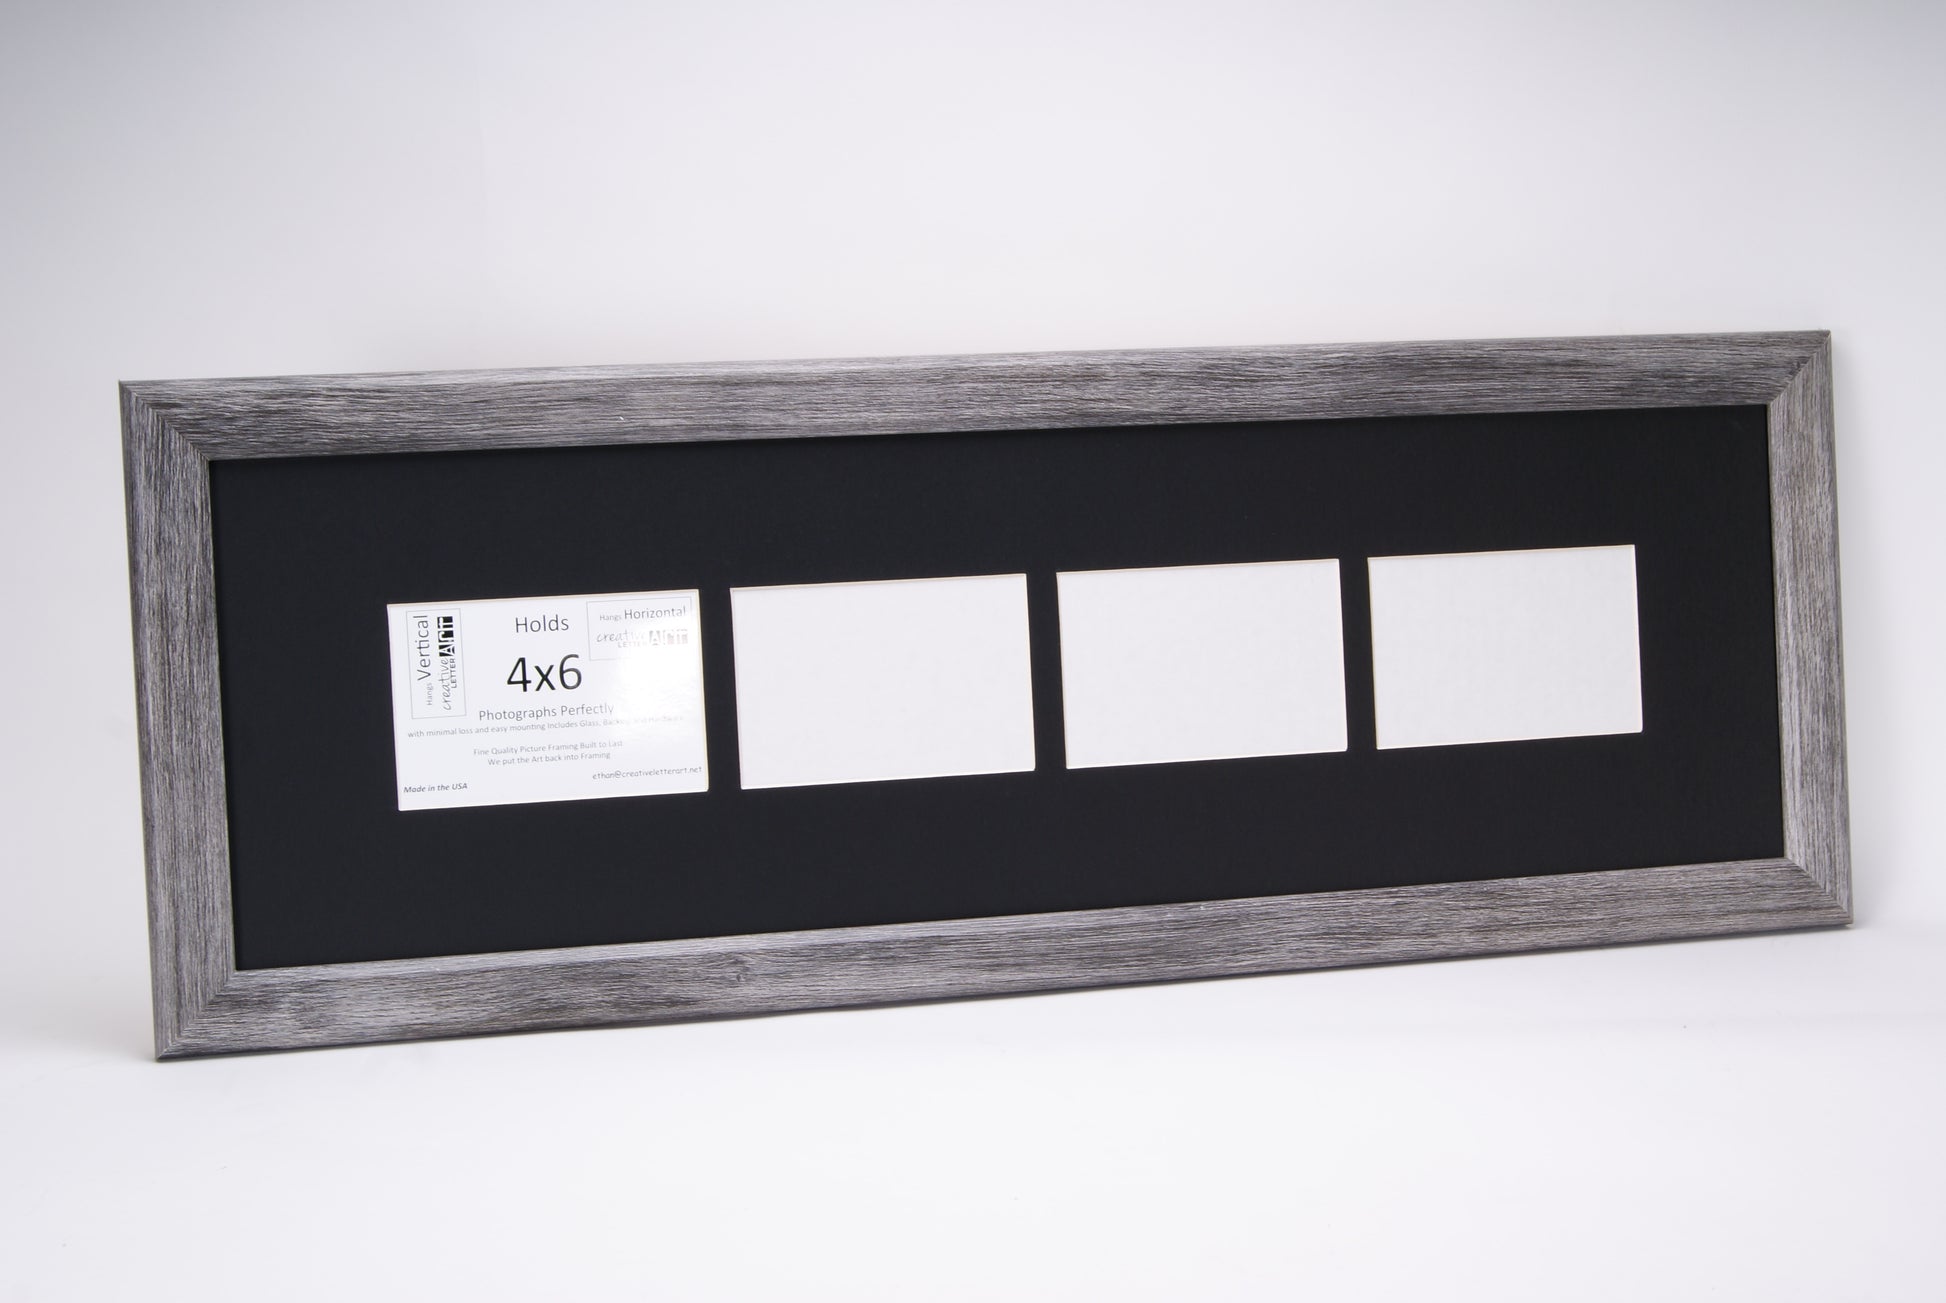 4x6-inch 2-6 Opening Driftwood Vertical Picture Frame –